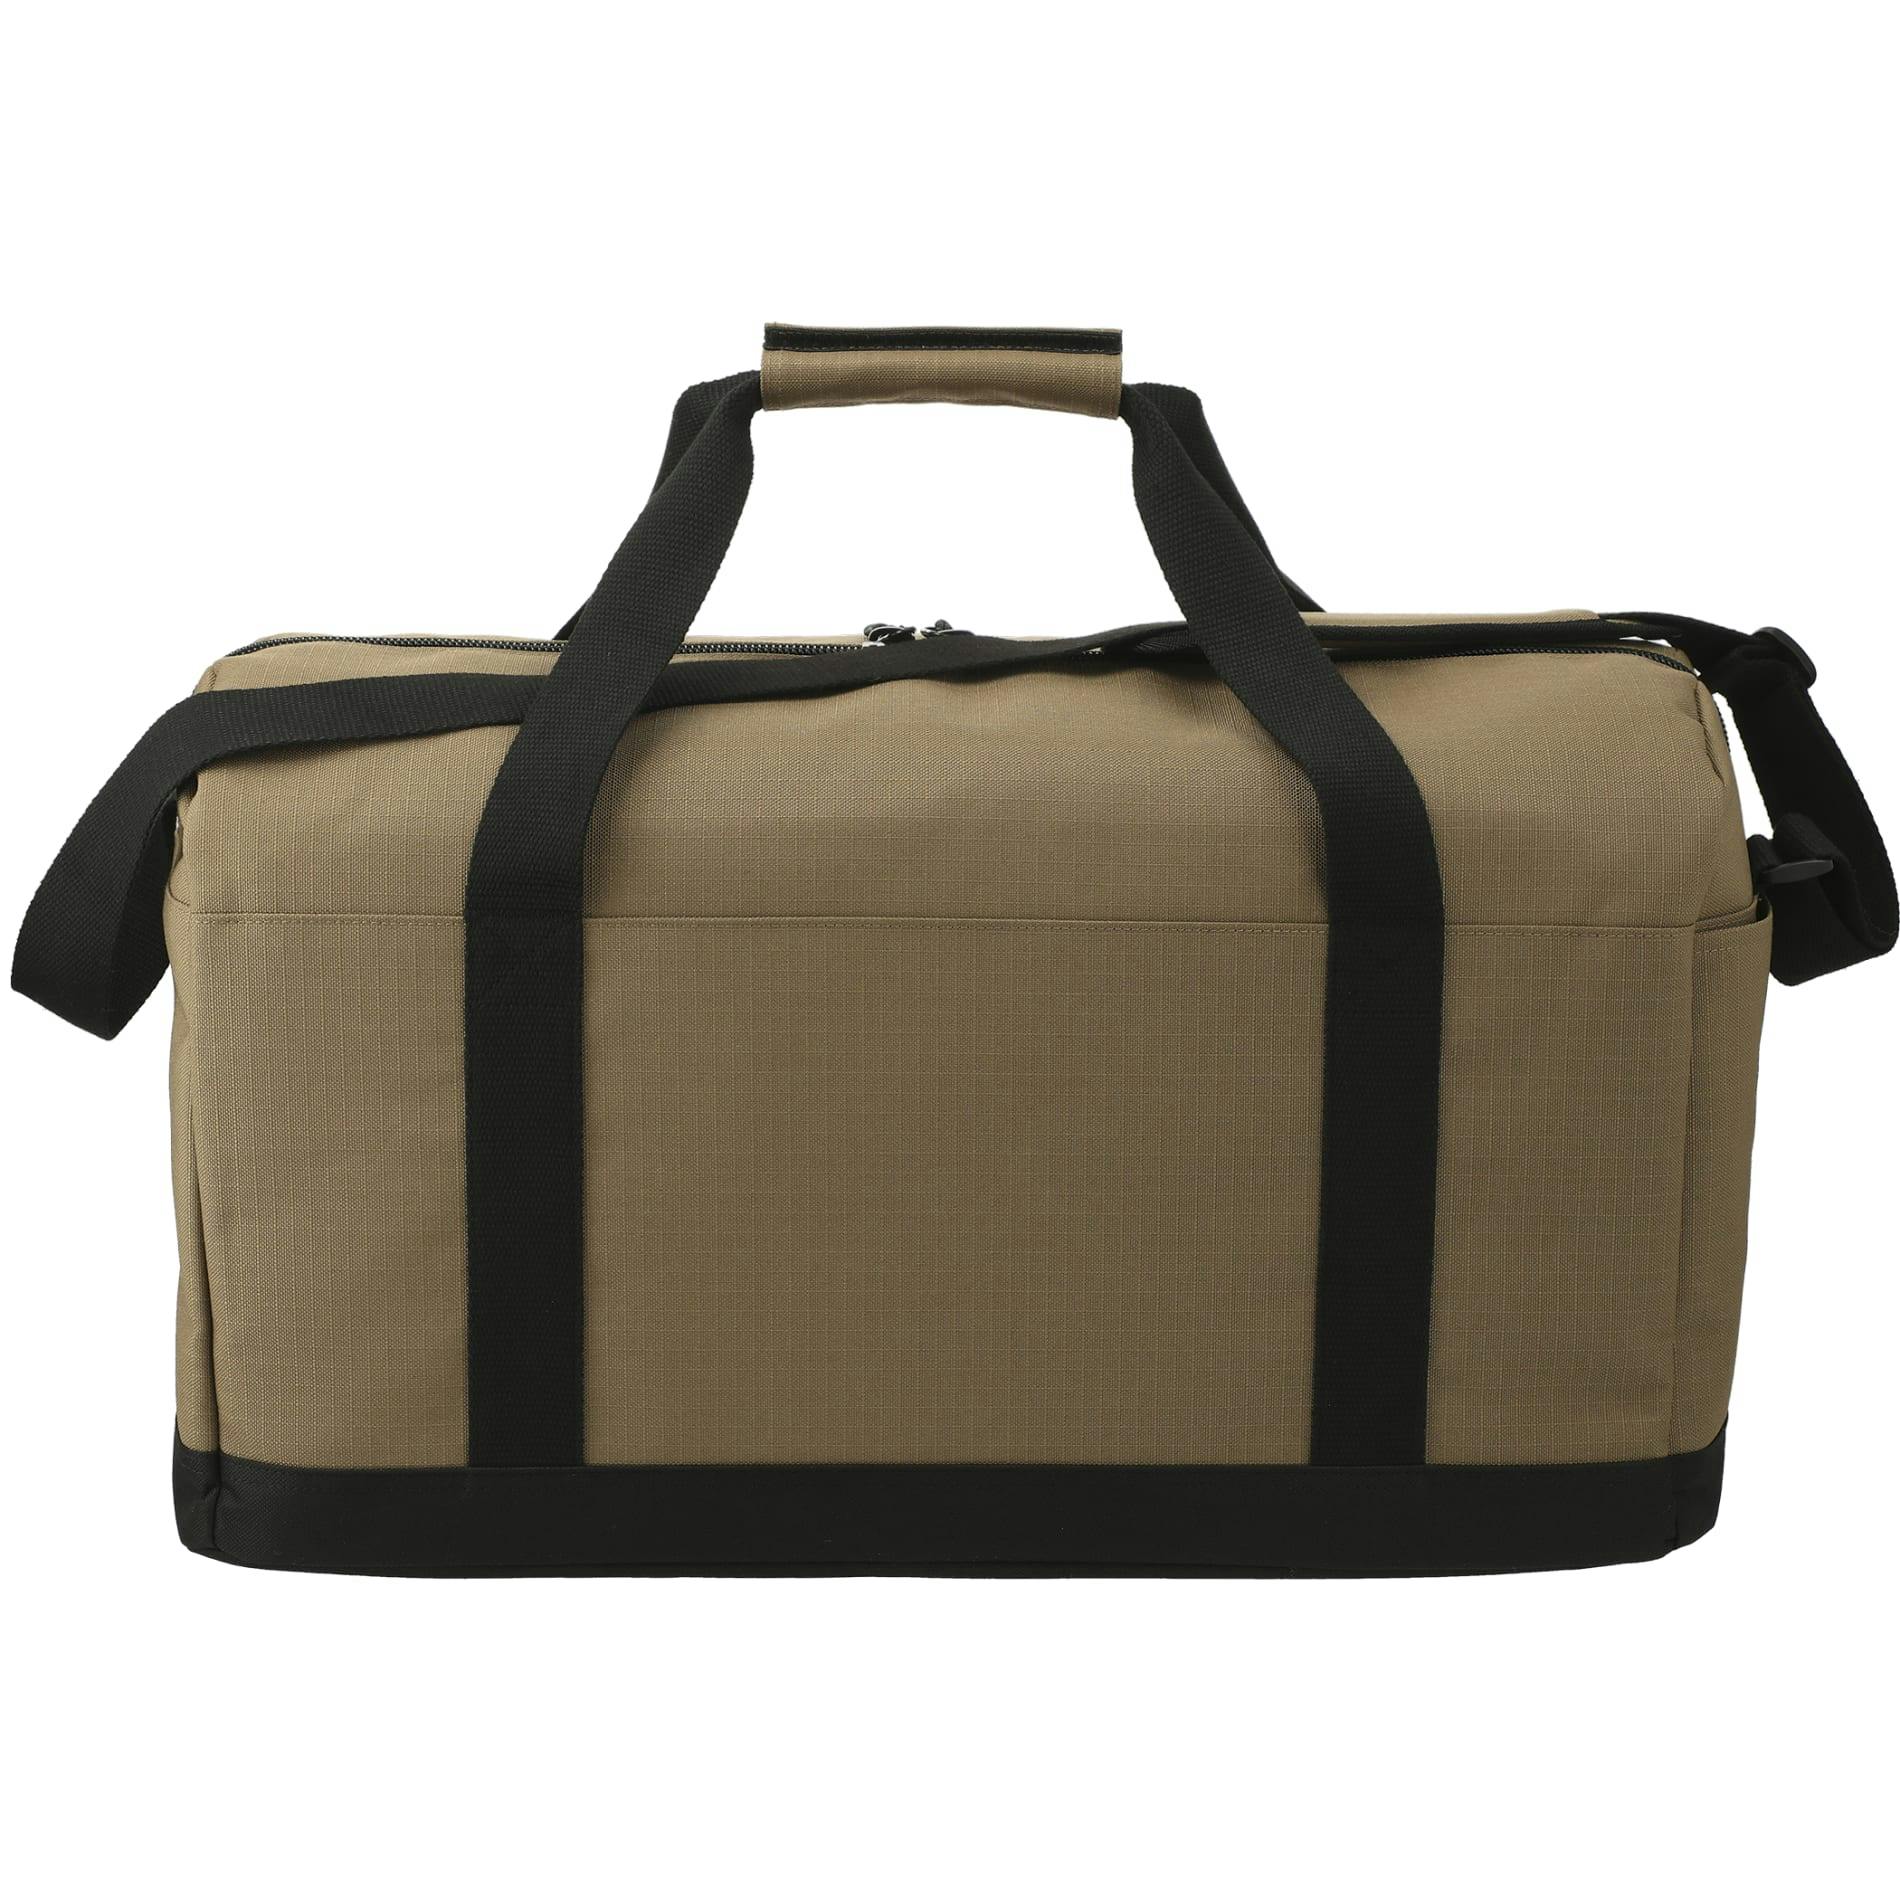 NBN Recycled Utility Duffel - additional Image 2